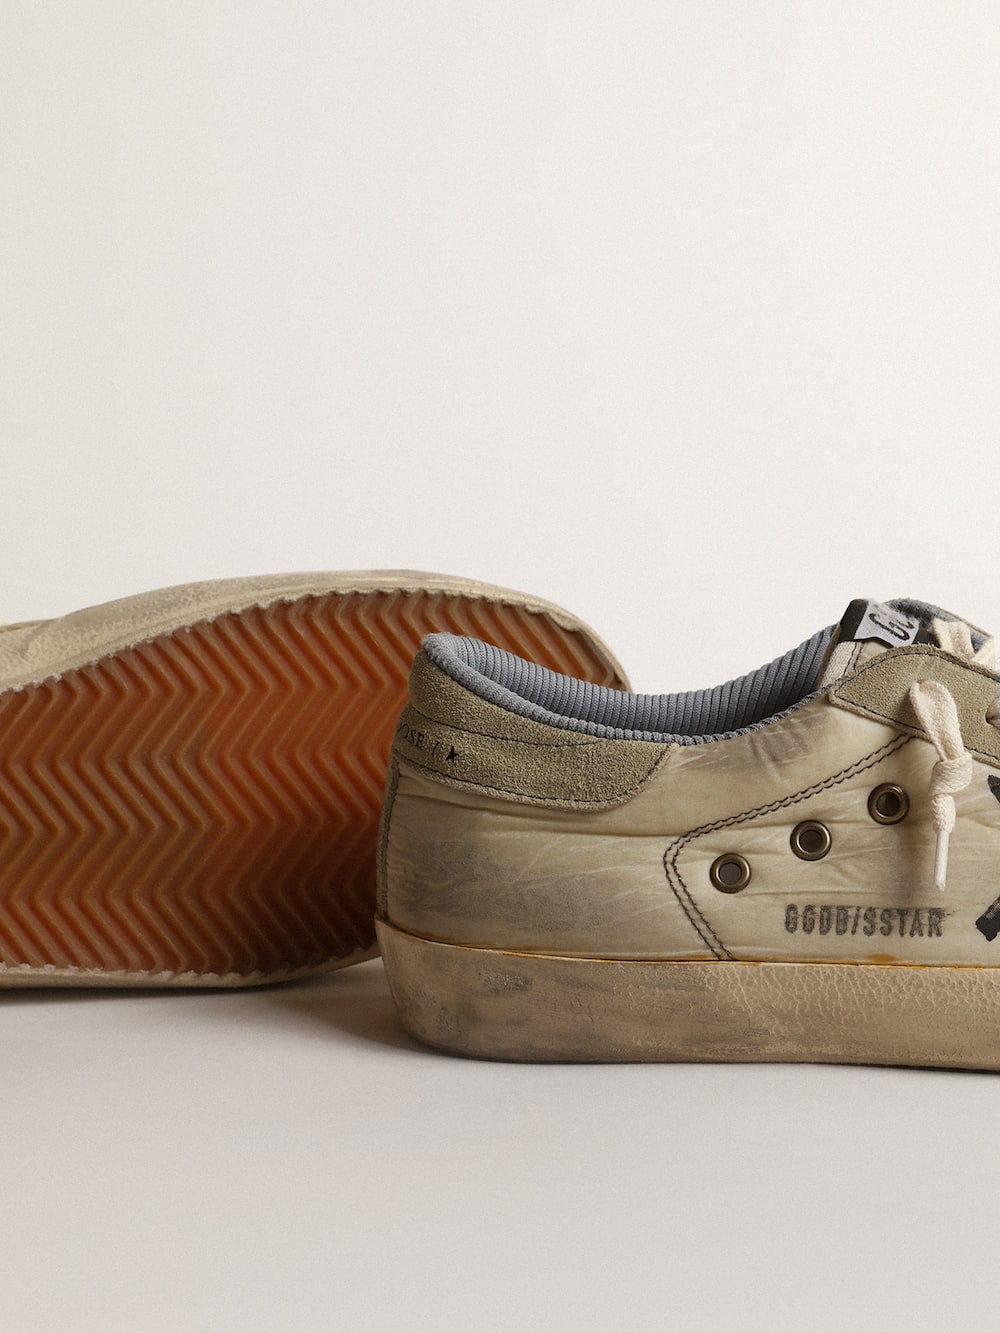 Golden Goose - Super-Star in nylon with black screen-printed star and suede heel tab in 